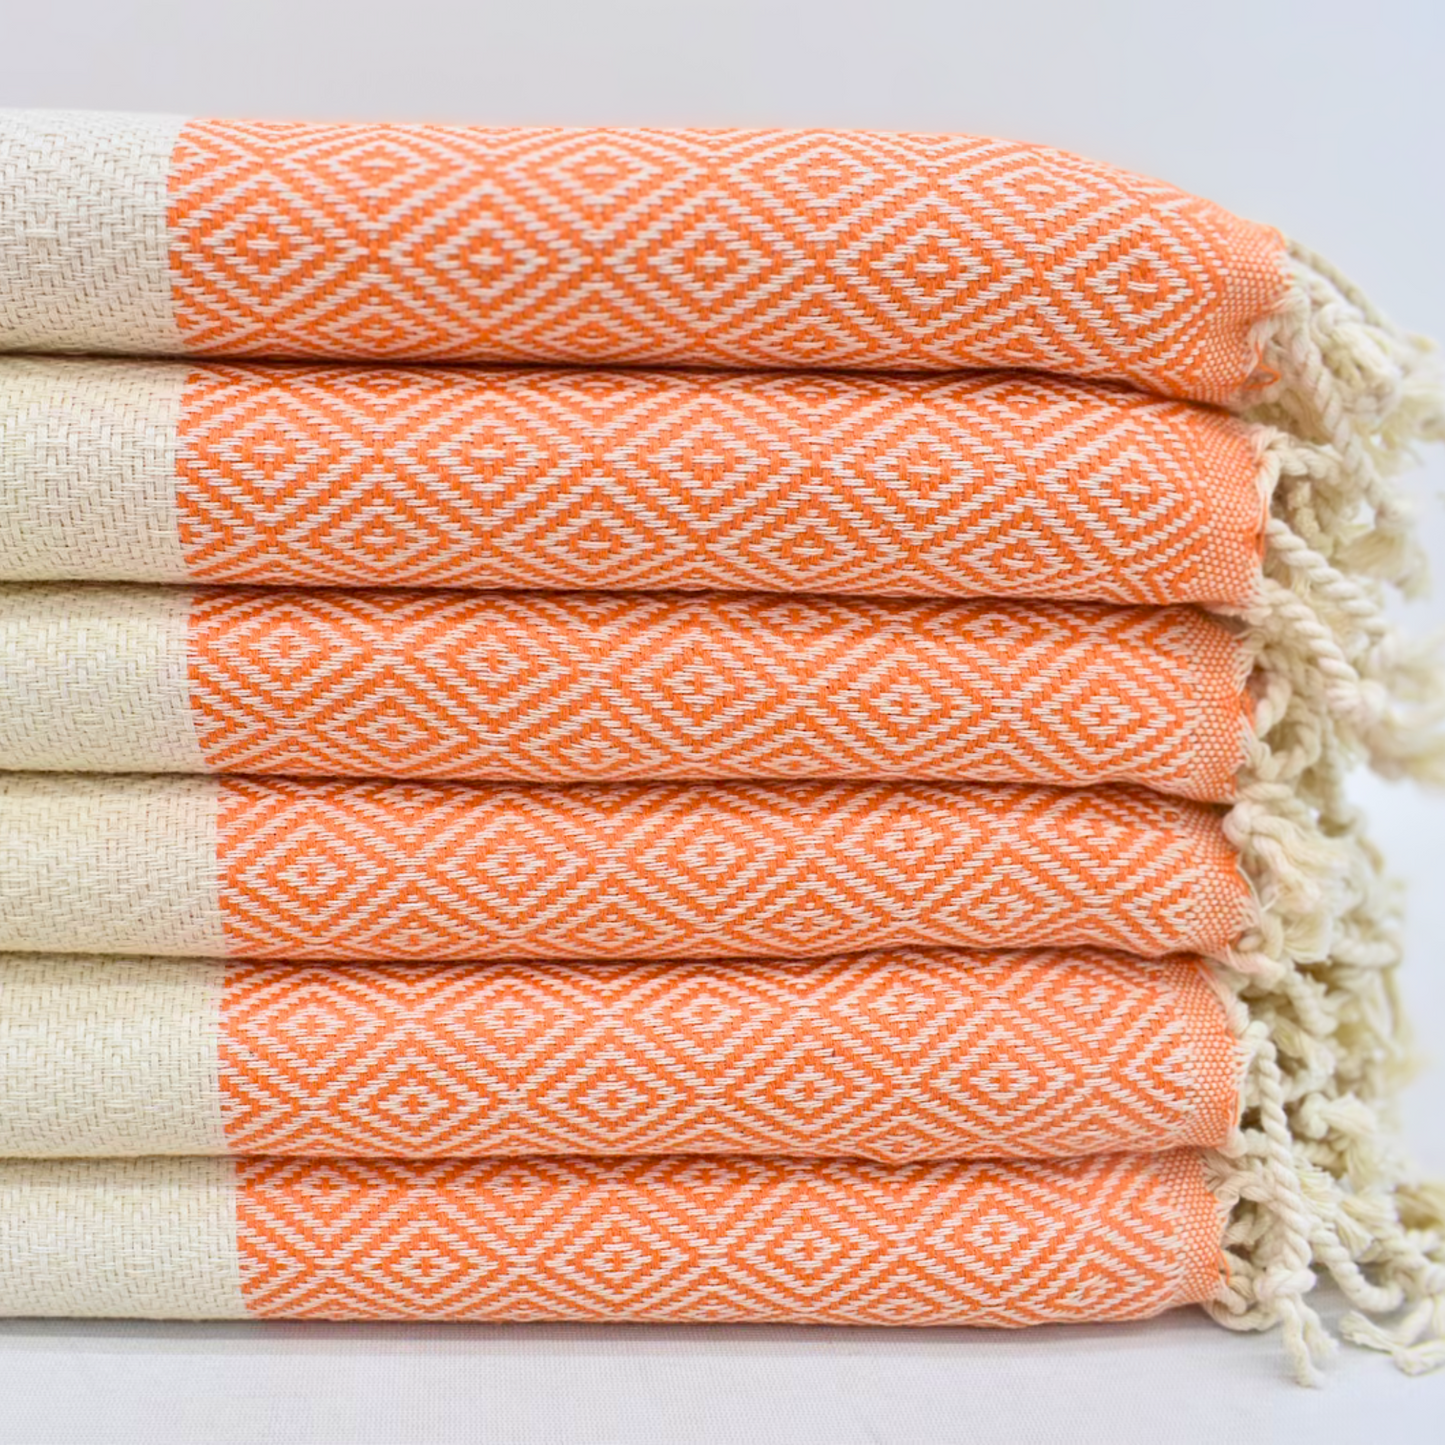 Stack of folded Turkish towels featuring orange diamond patterns and natural color stripes, topped with hand-tied knots, exuding autumnal elegance